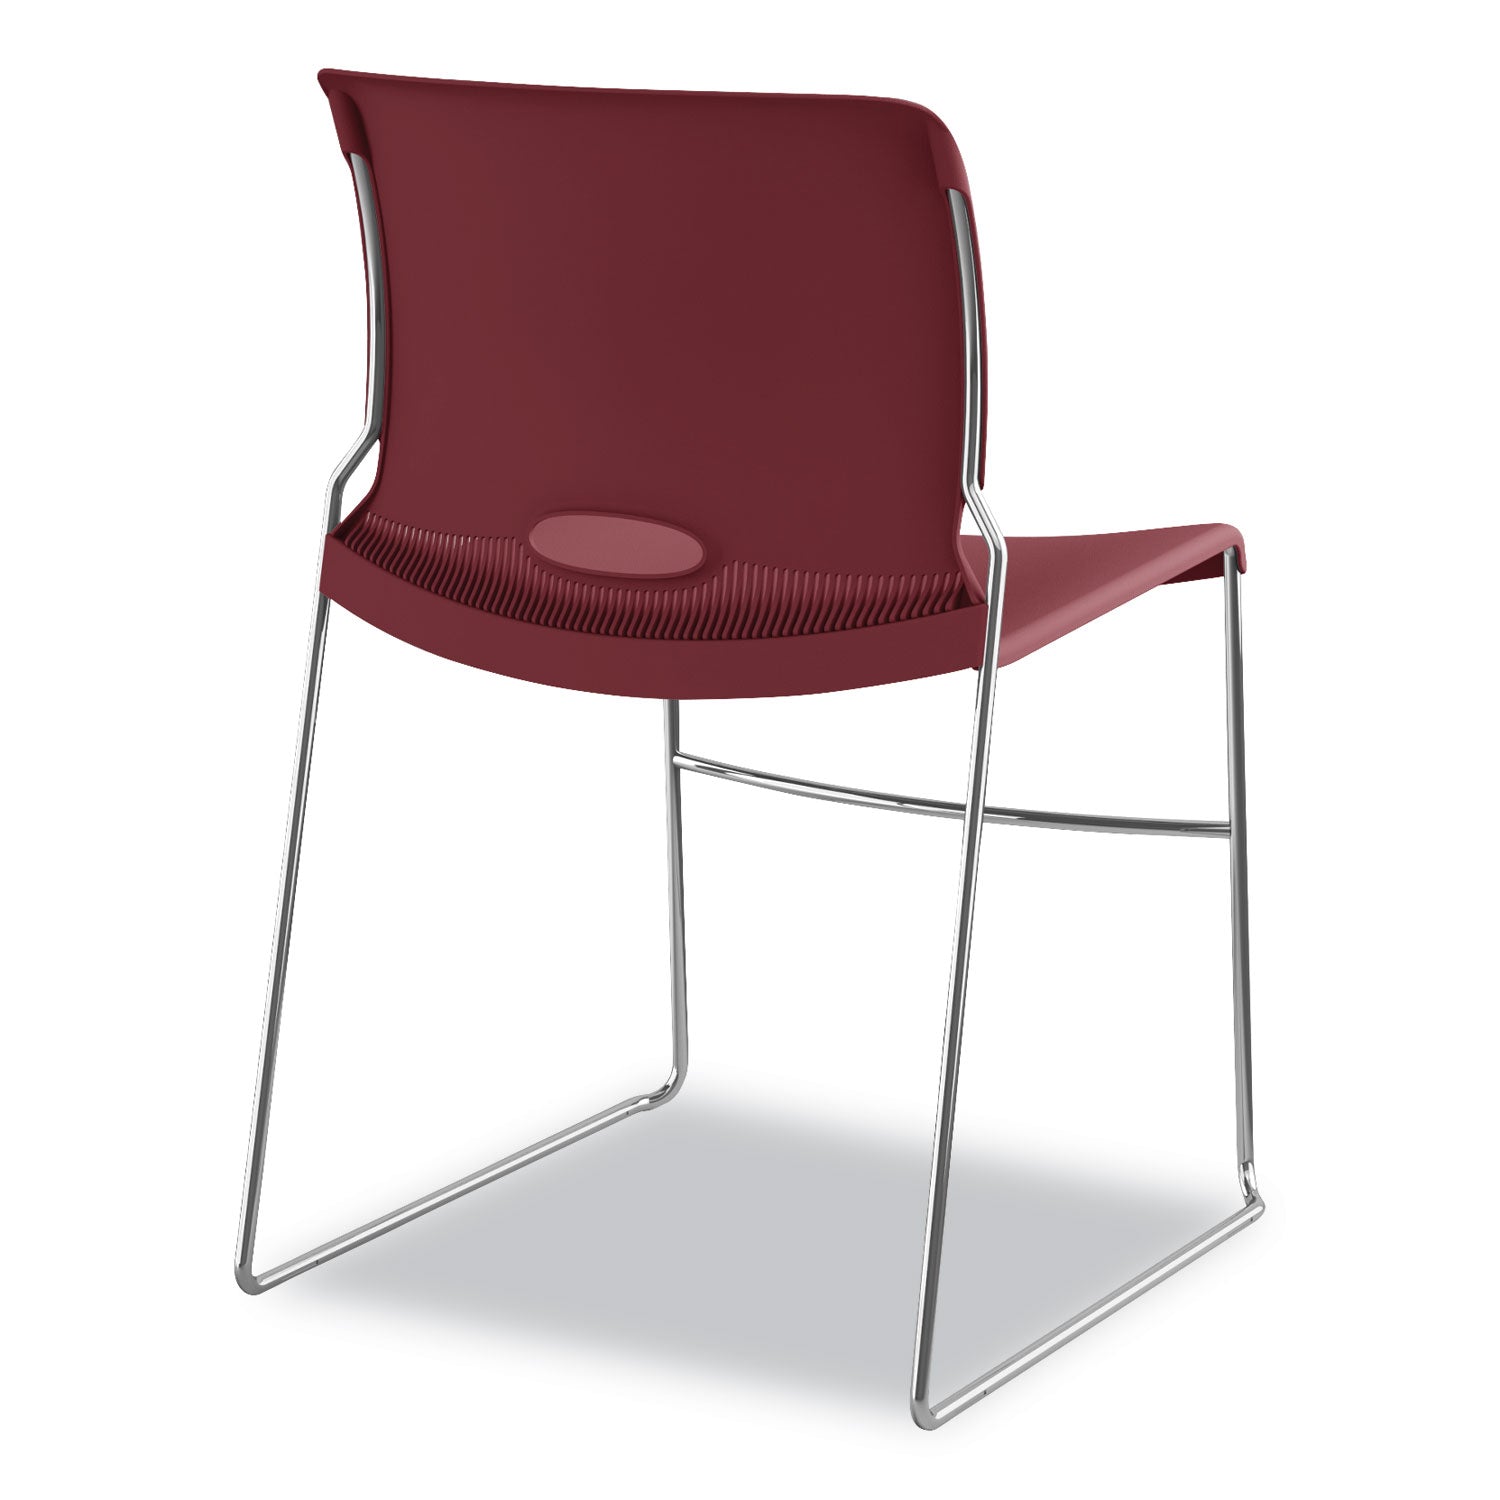 Olson Stacker High Density Chair, Supports 300 lb, 17.75" Seat Height, Mulberry Seat, Mulberry Back, Chrome Base, 4/Carton - 